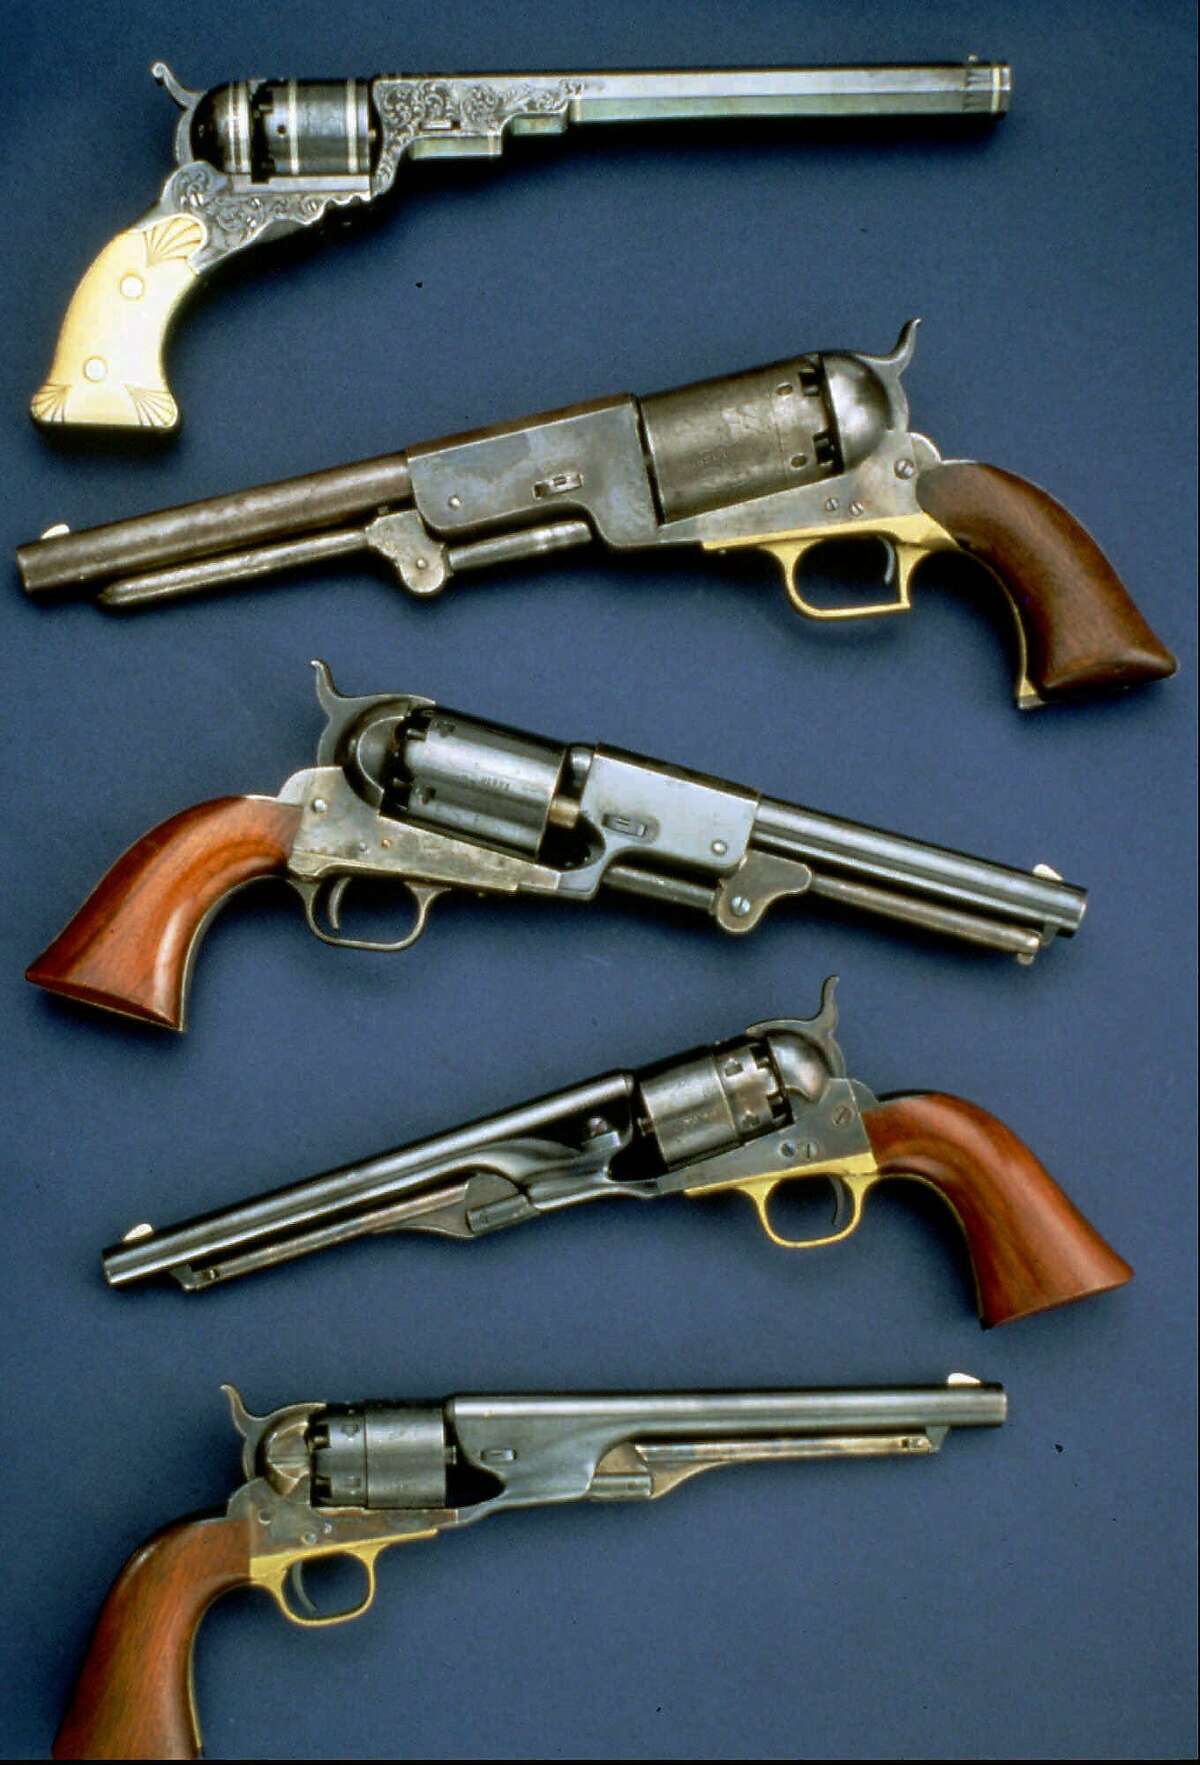 FILE-- Colt handguns are shown in this undated handout photo. Colt's Manufacturing Co., inventor of the six-shooter, plans to stop taking orders for most of its retail handguns so it can limit its liability in lawsuits, according to published reports, Monday, Oct. 11, 1999. The company plans focus instead on selling to the military, law enforcement agencies and collectors, who already account for the bulk of its business. (AP Photo/File)